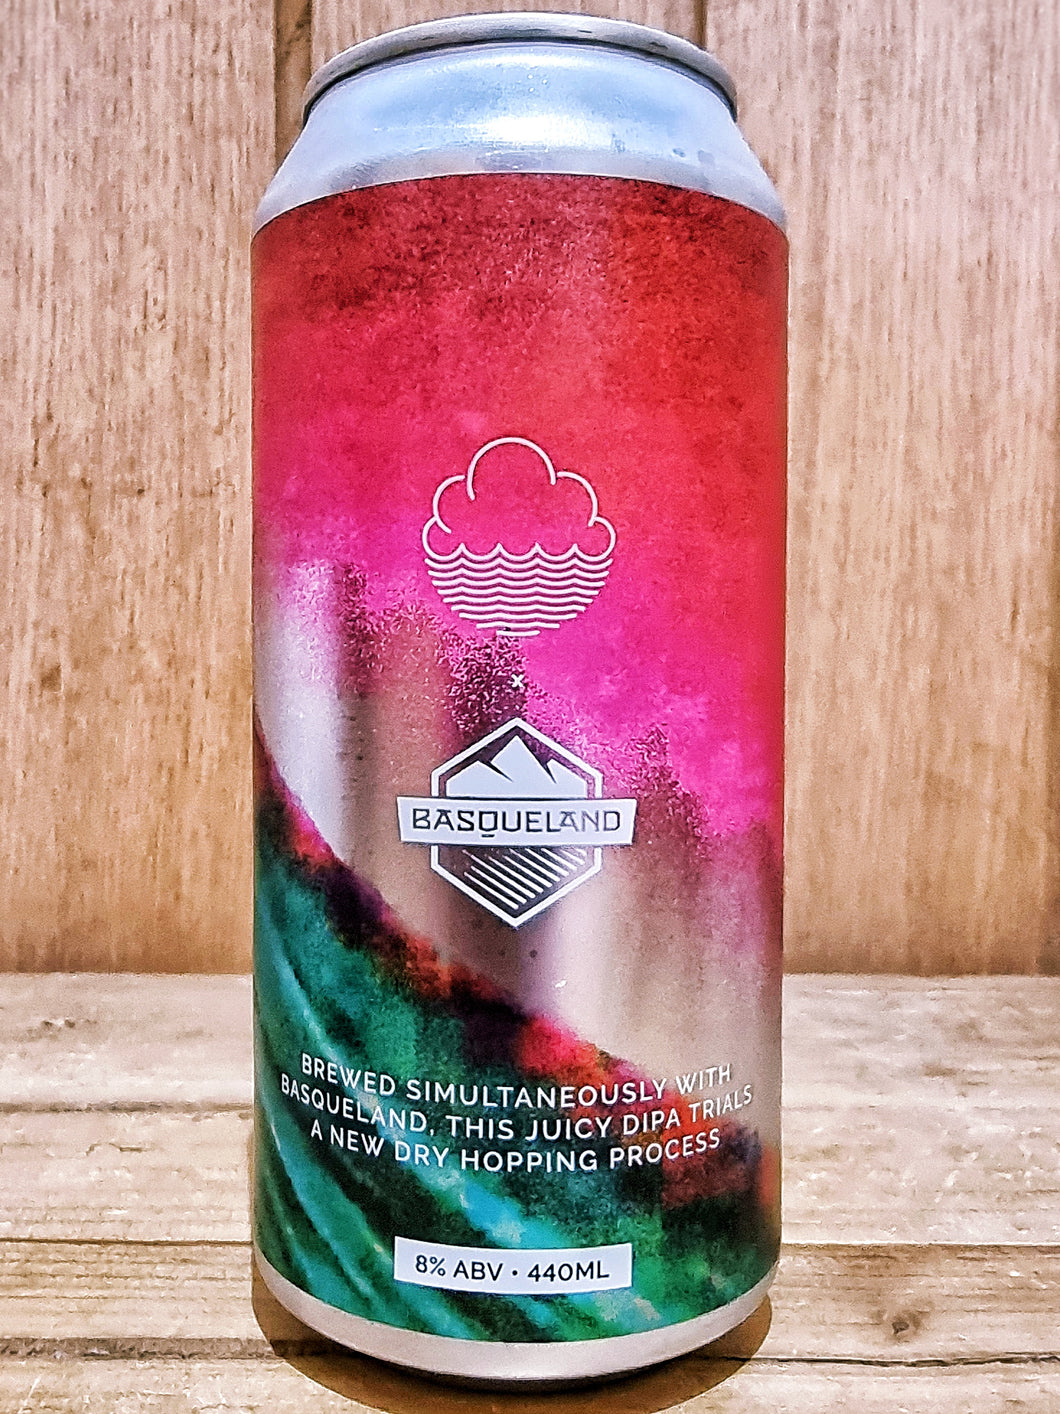 Cloudwater v Basqueland - Six Degrees Of Separation